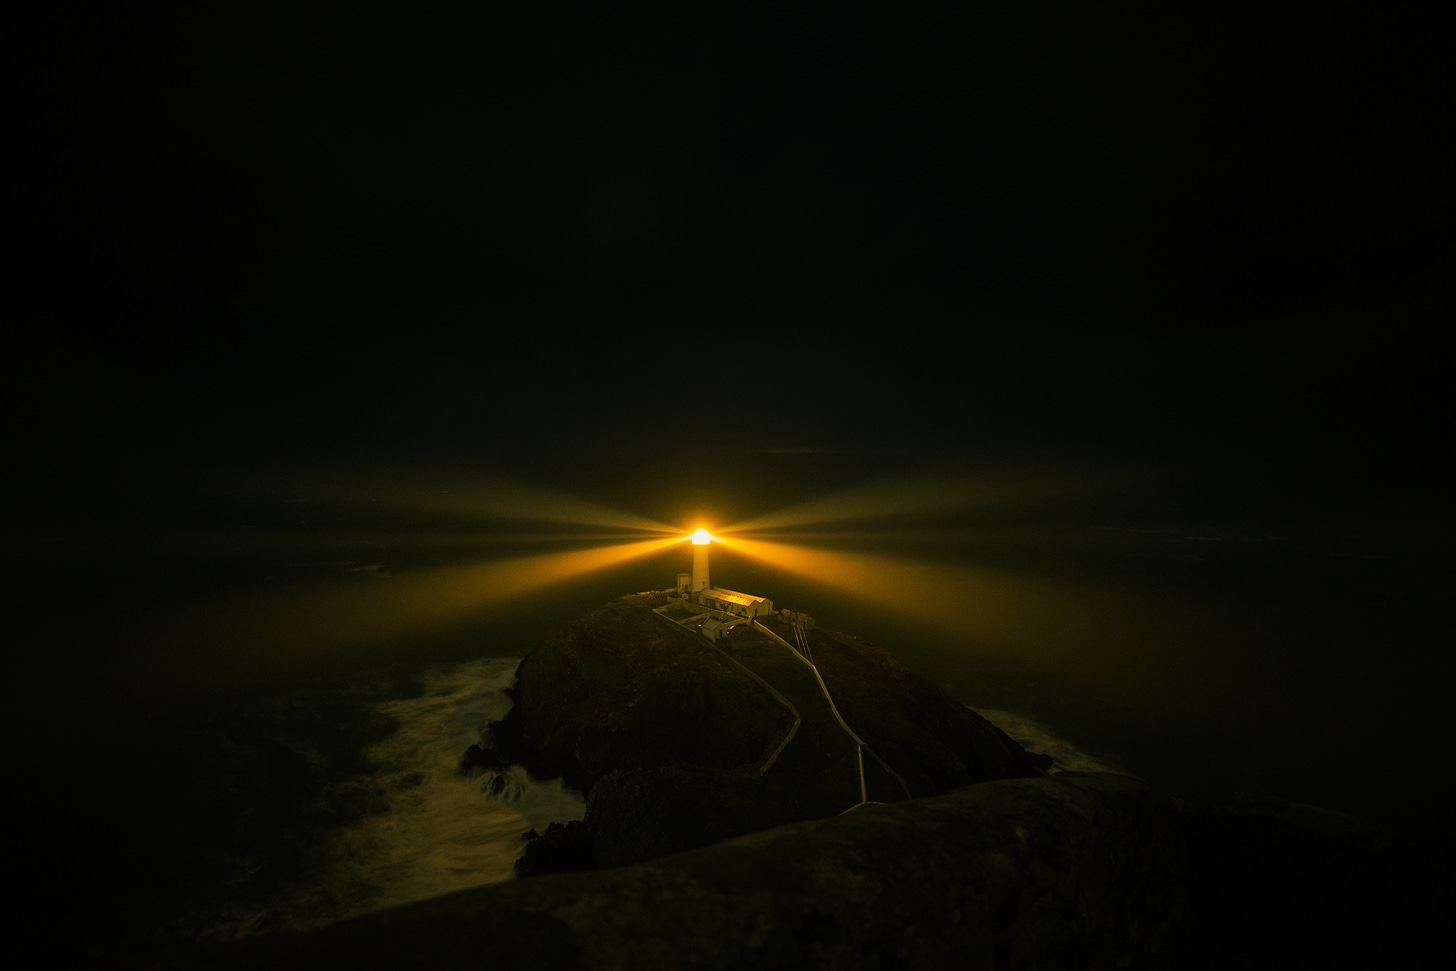 A lighthouse on the top of a hill shining orange light. The rest of the picture is black.